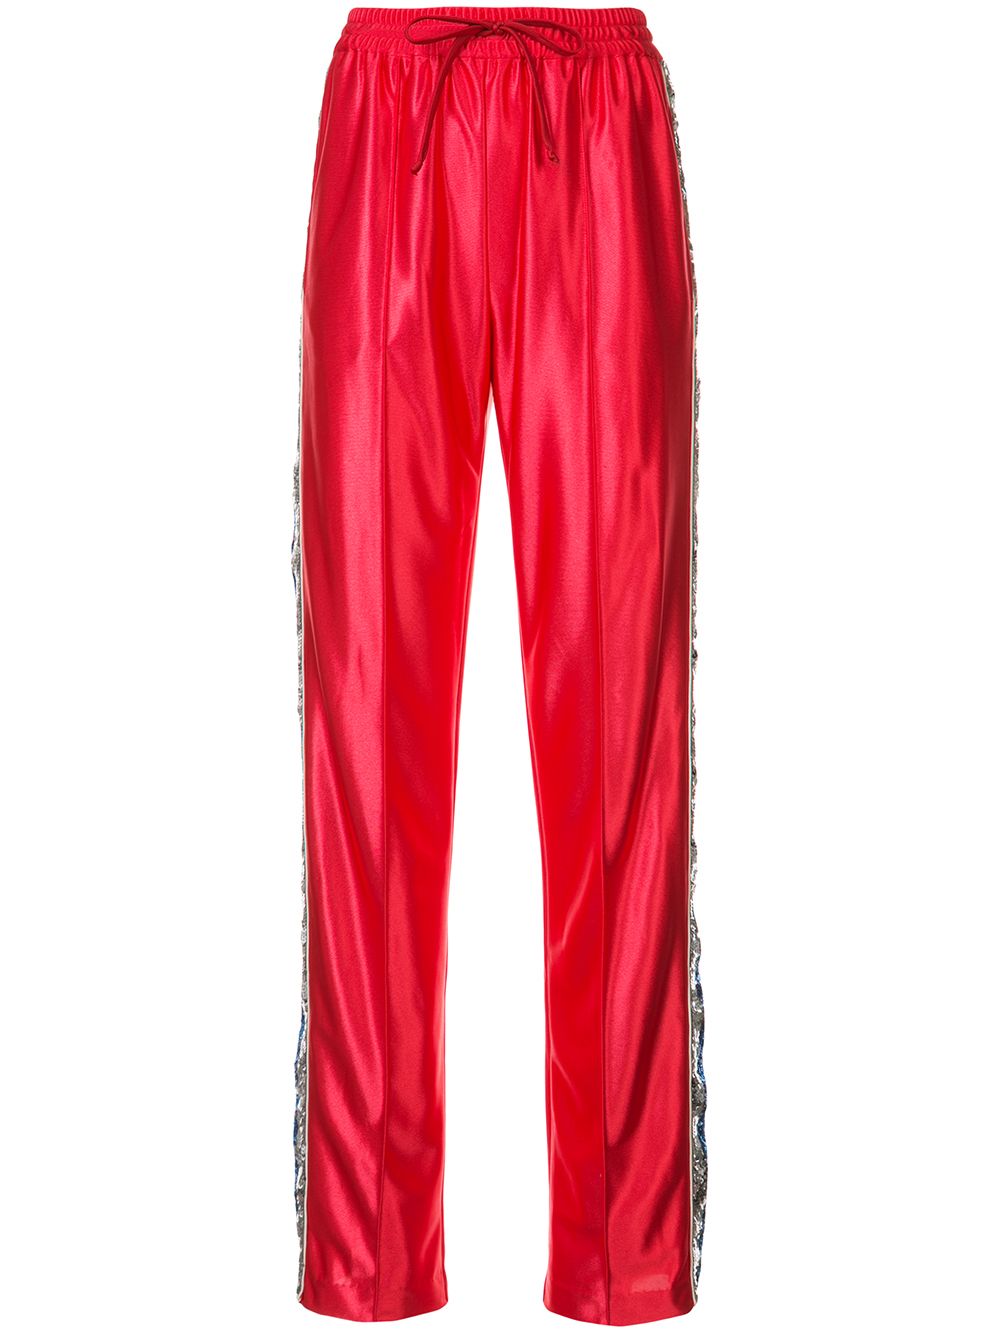 GUCCI SEQUIN SIDE PANEL TRACK PANTS,515075X9R8212984180